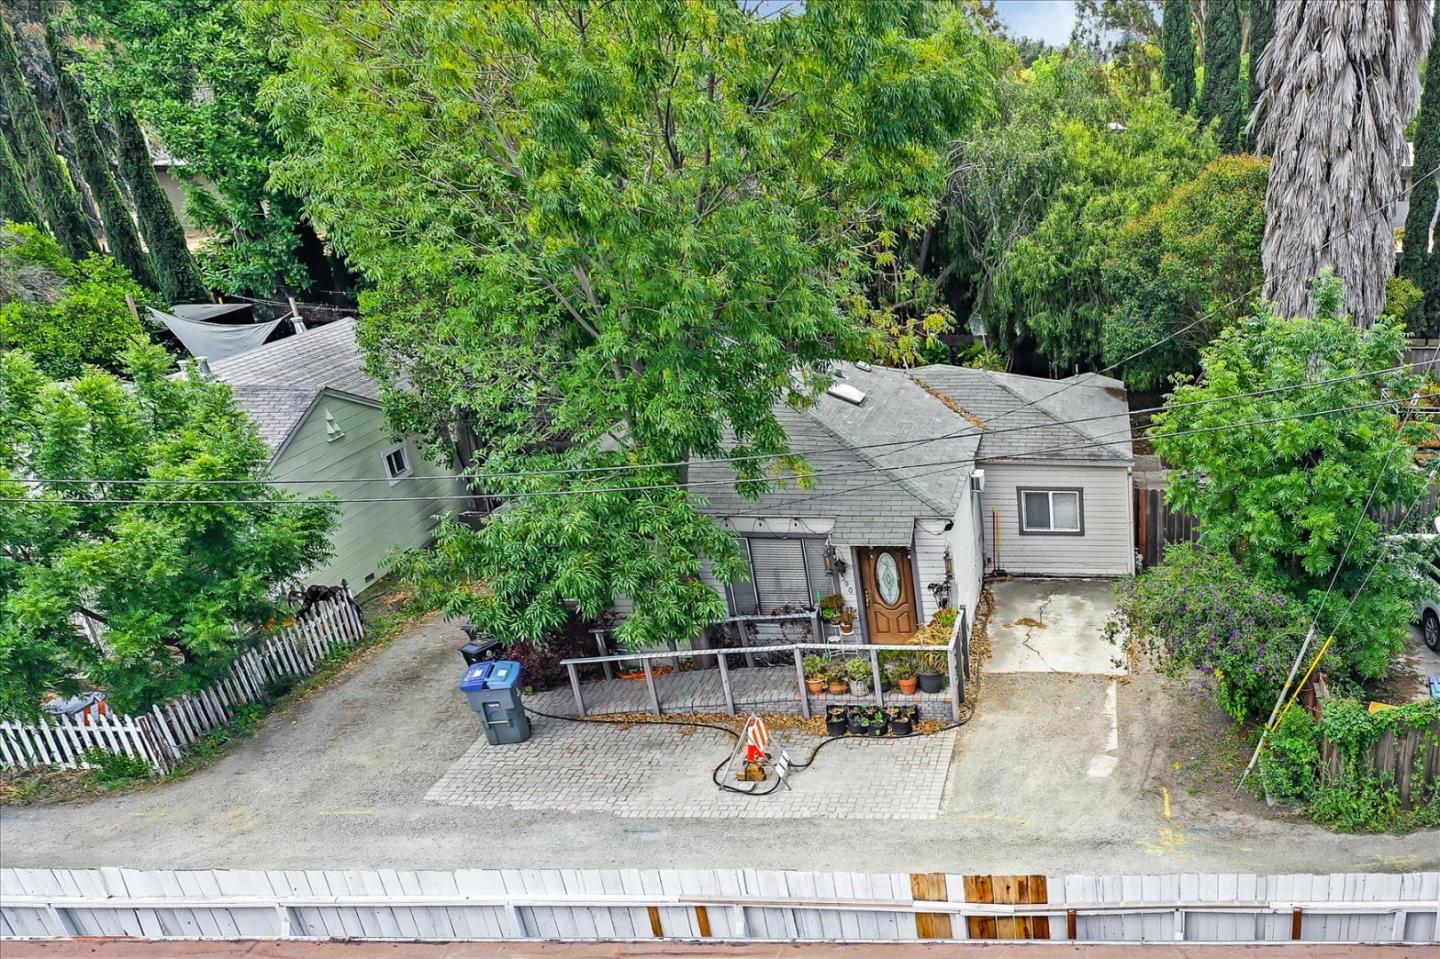 an aerial view of a house with outdoor seating